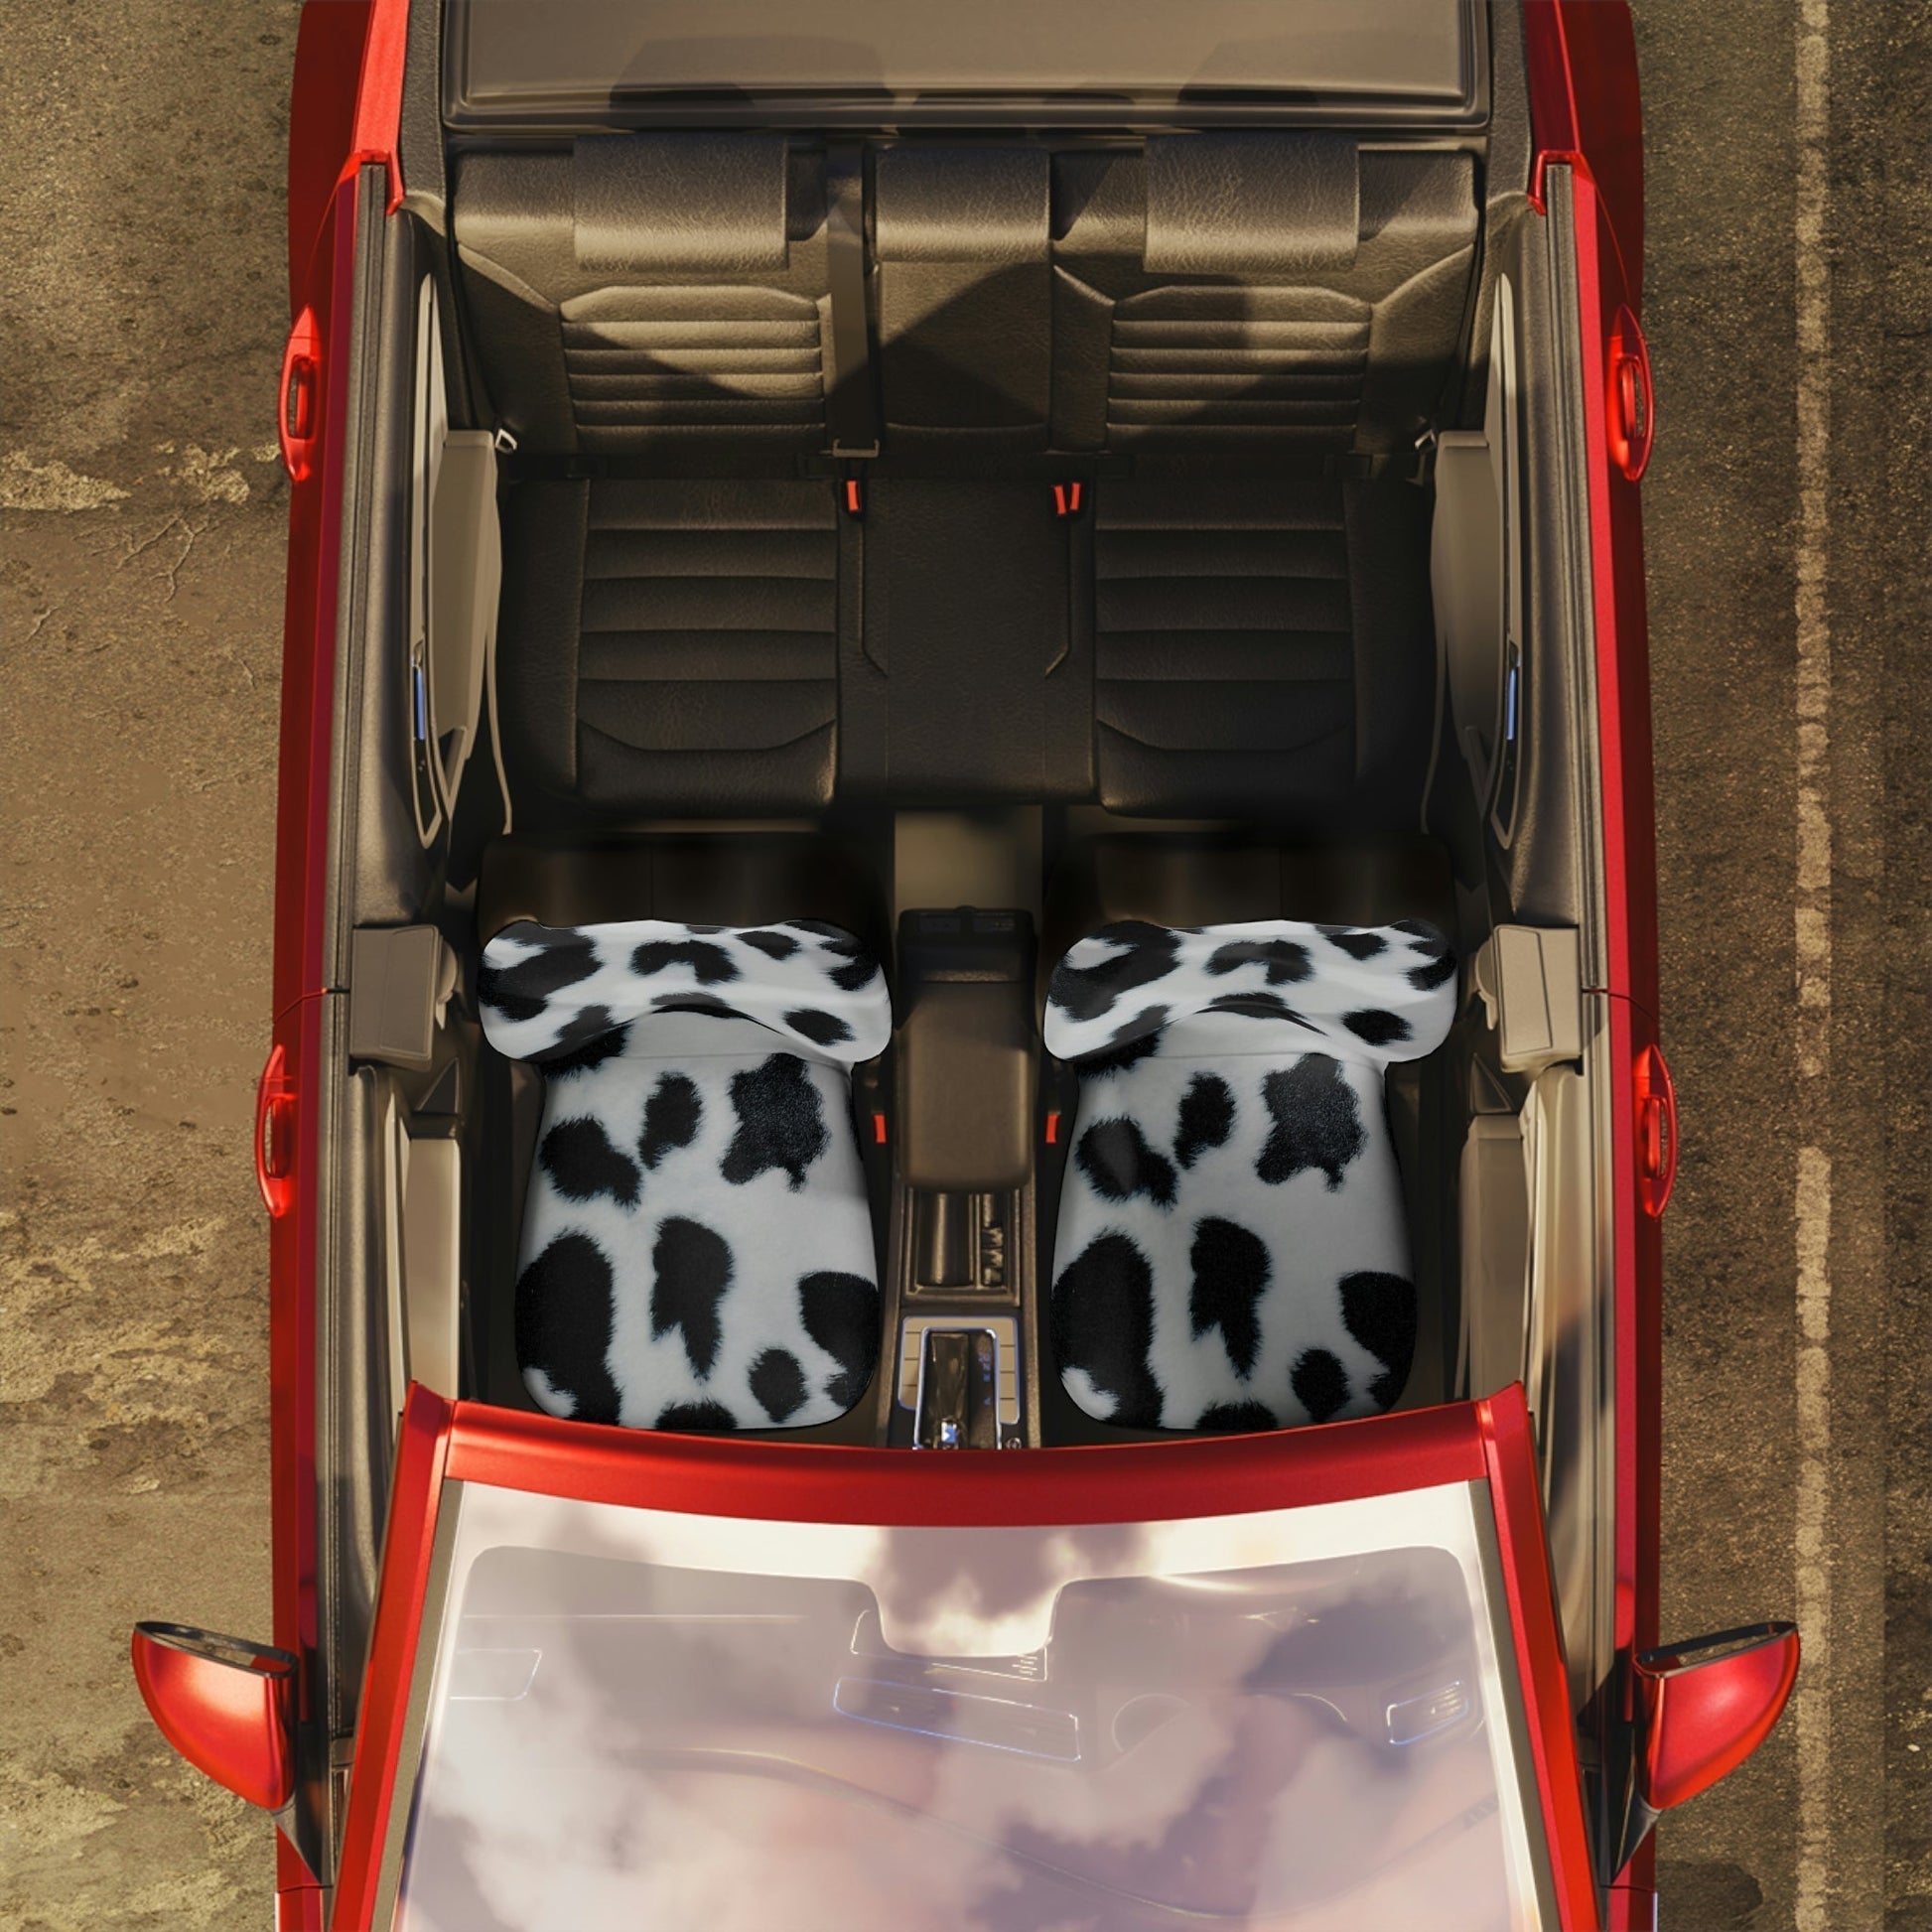 Cow Print Seat Covers for Car, Animal Print Car Seat Cover